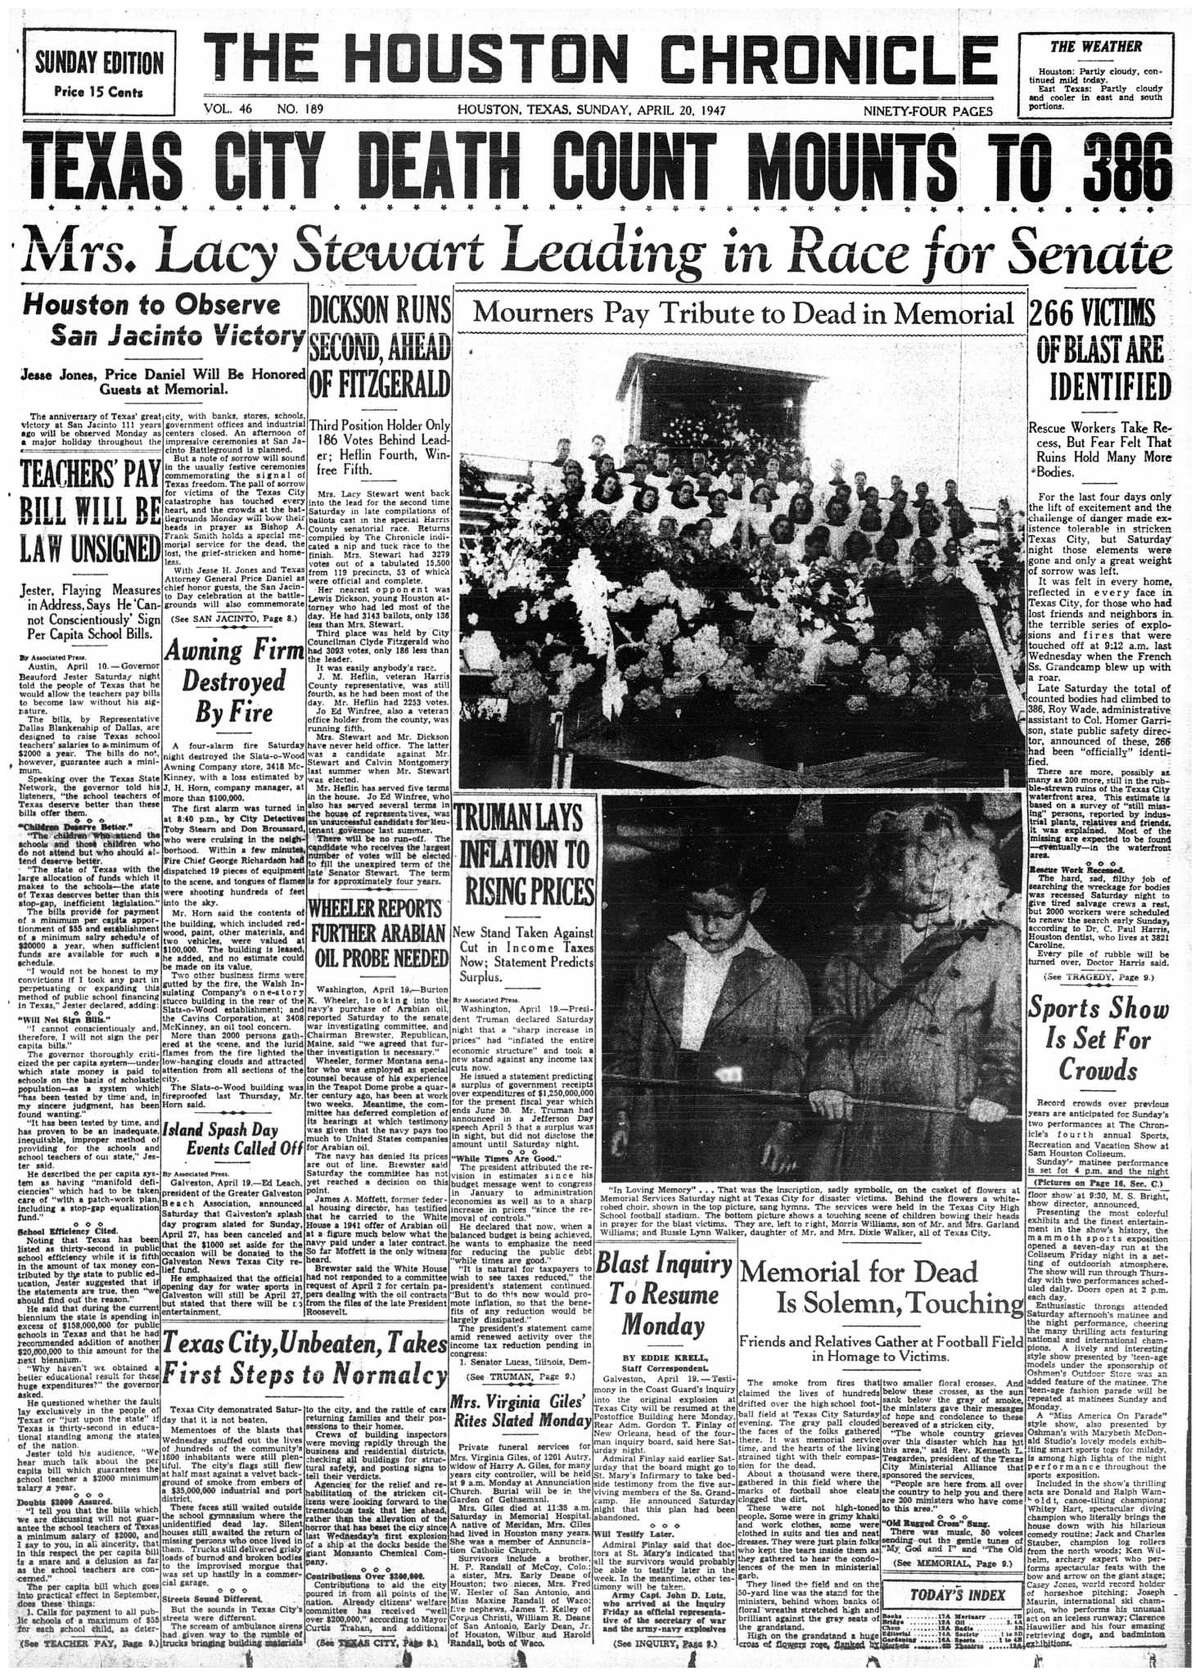 Houston Chronicle front page - April 20, 1947 - section 1, page 1